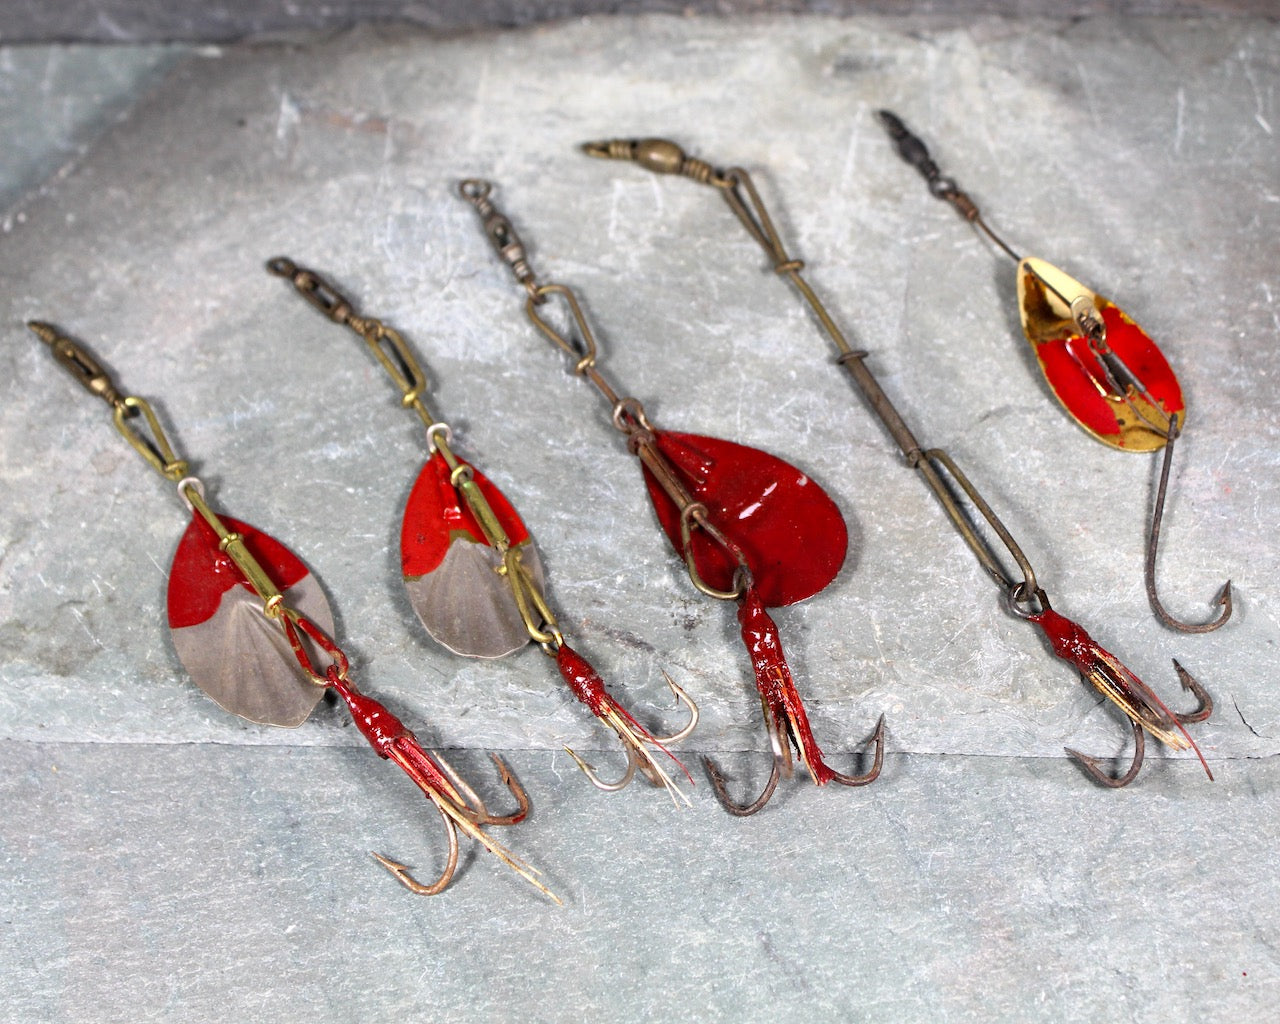 KINGS ON THE BAY, Checkout these spoons by Beaver's Lures